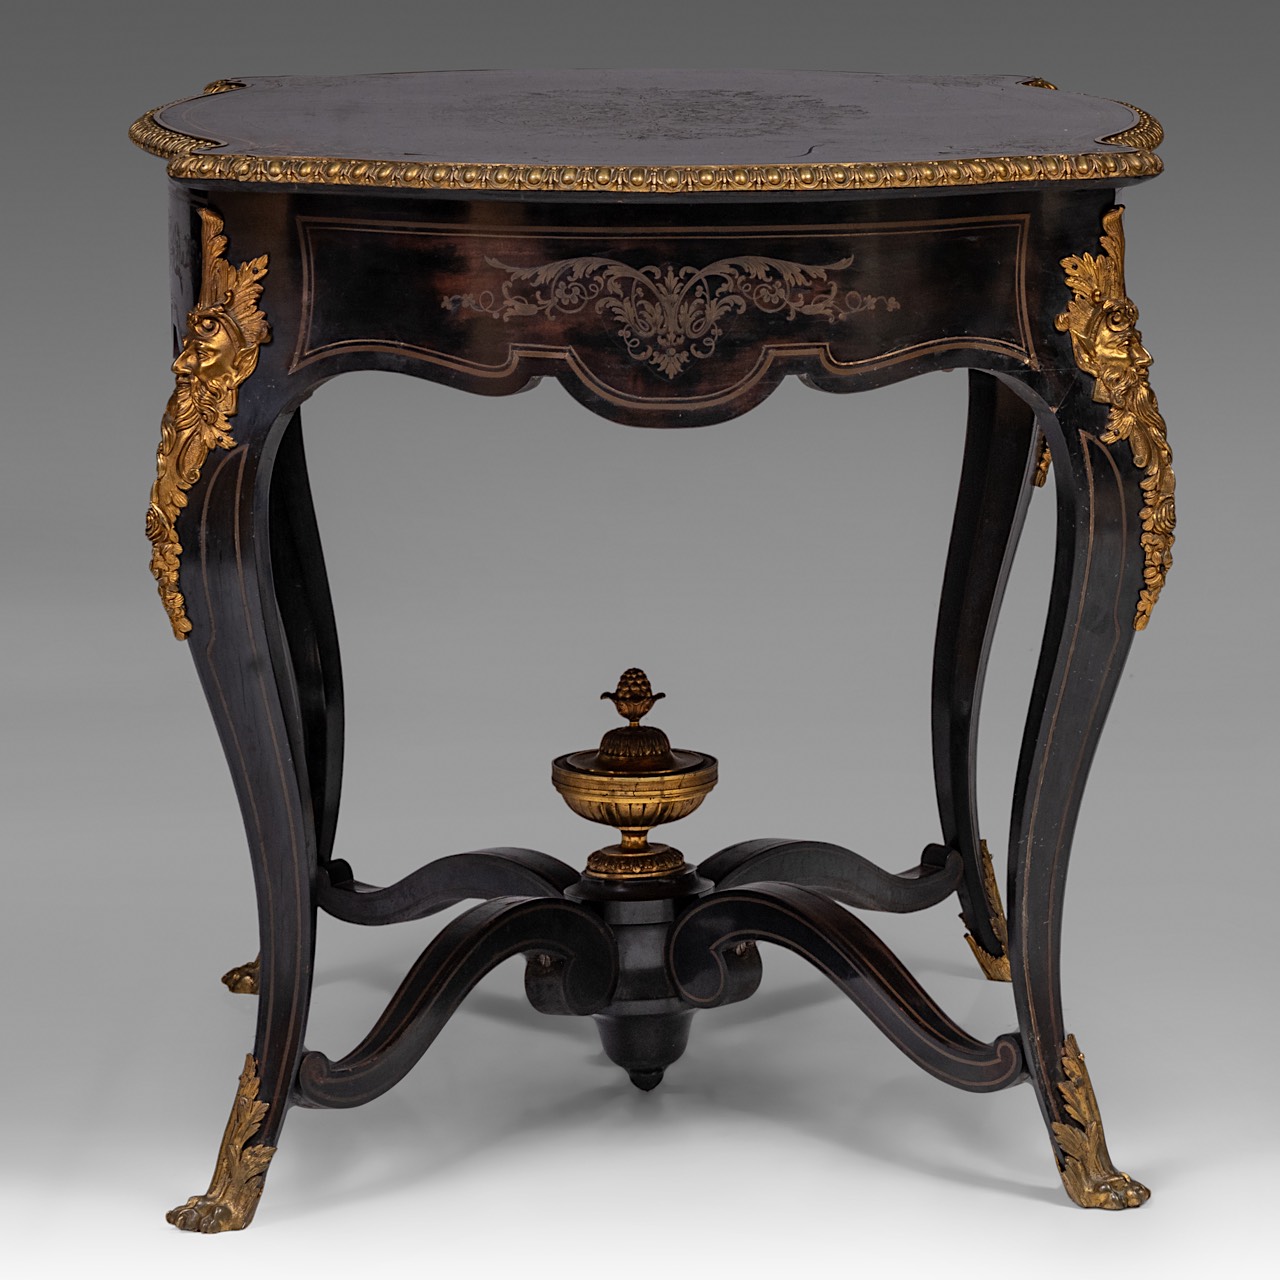 A Napoleon III (1852-1870) Boulle centre table, stamped 'HPR' Henri Picard (1840-1890), H 75 - W 120 - Image 3 of 10